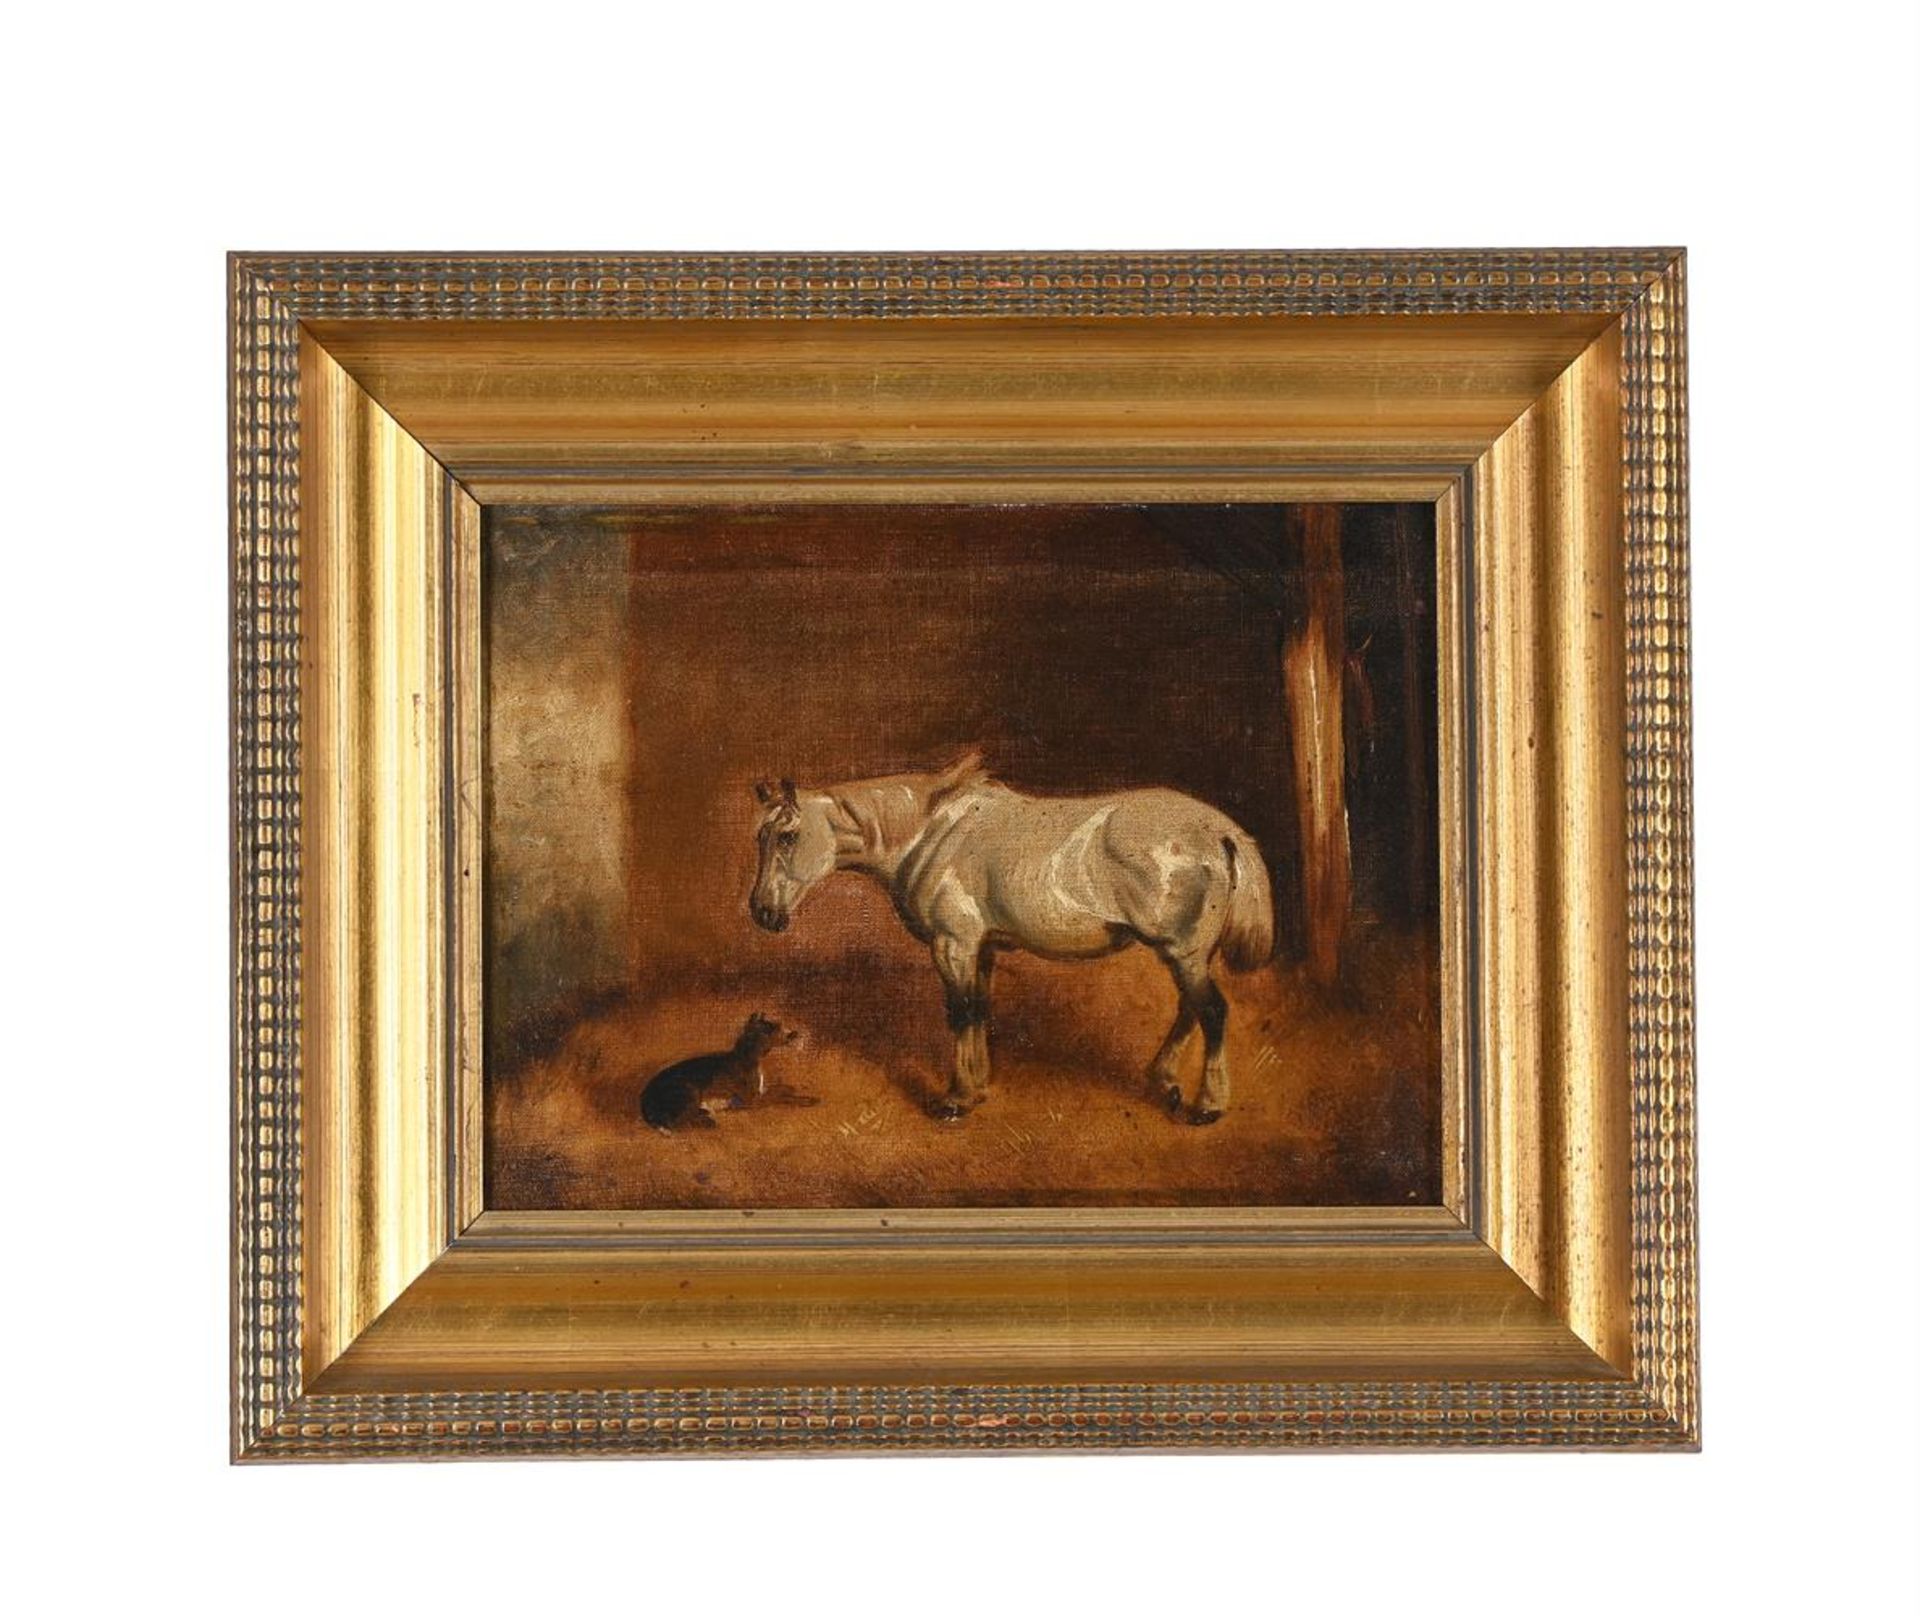 FOLLOWER OF JAMES CLARK, HORSE AND A DOG IN A BARN